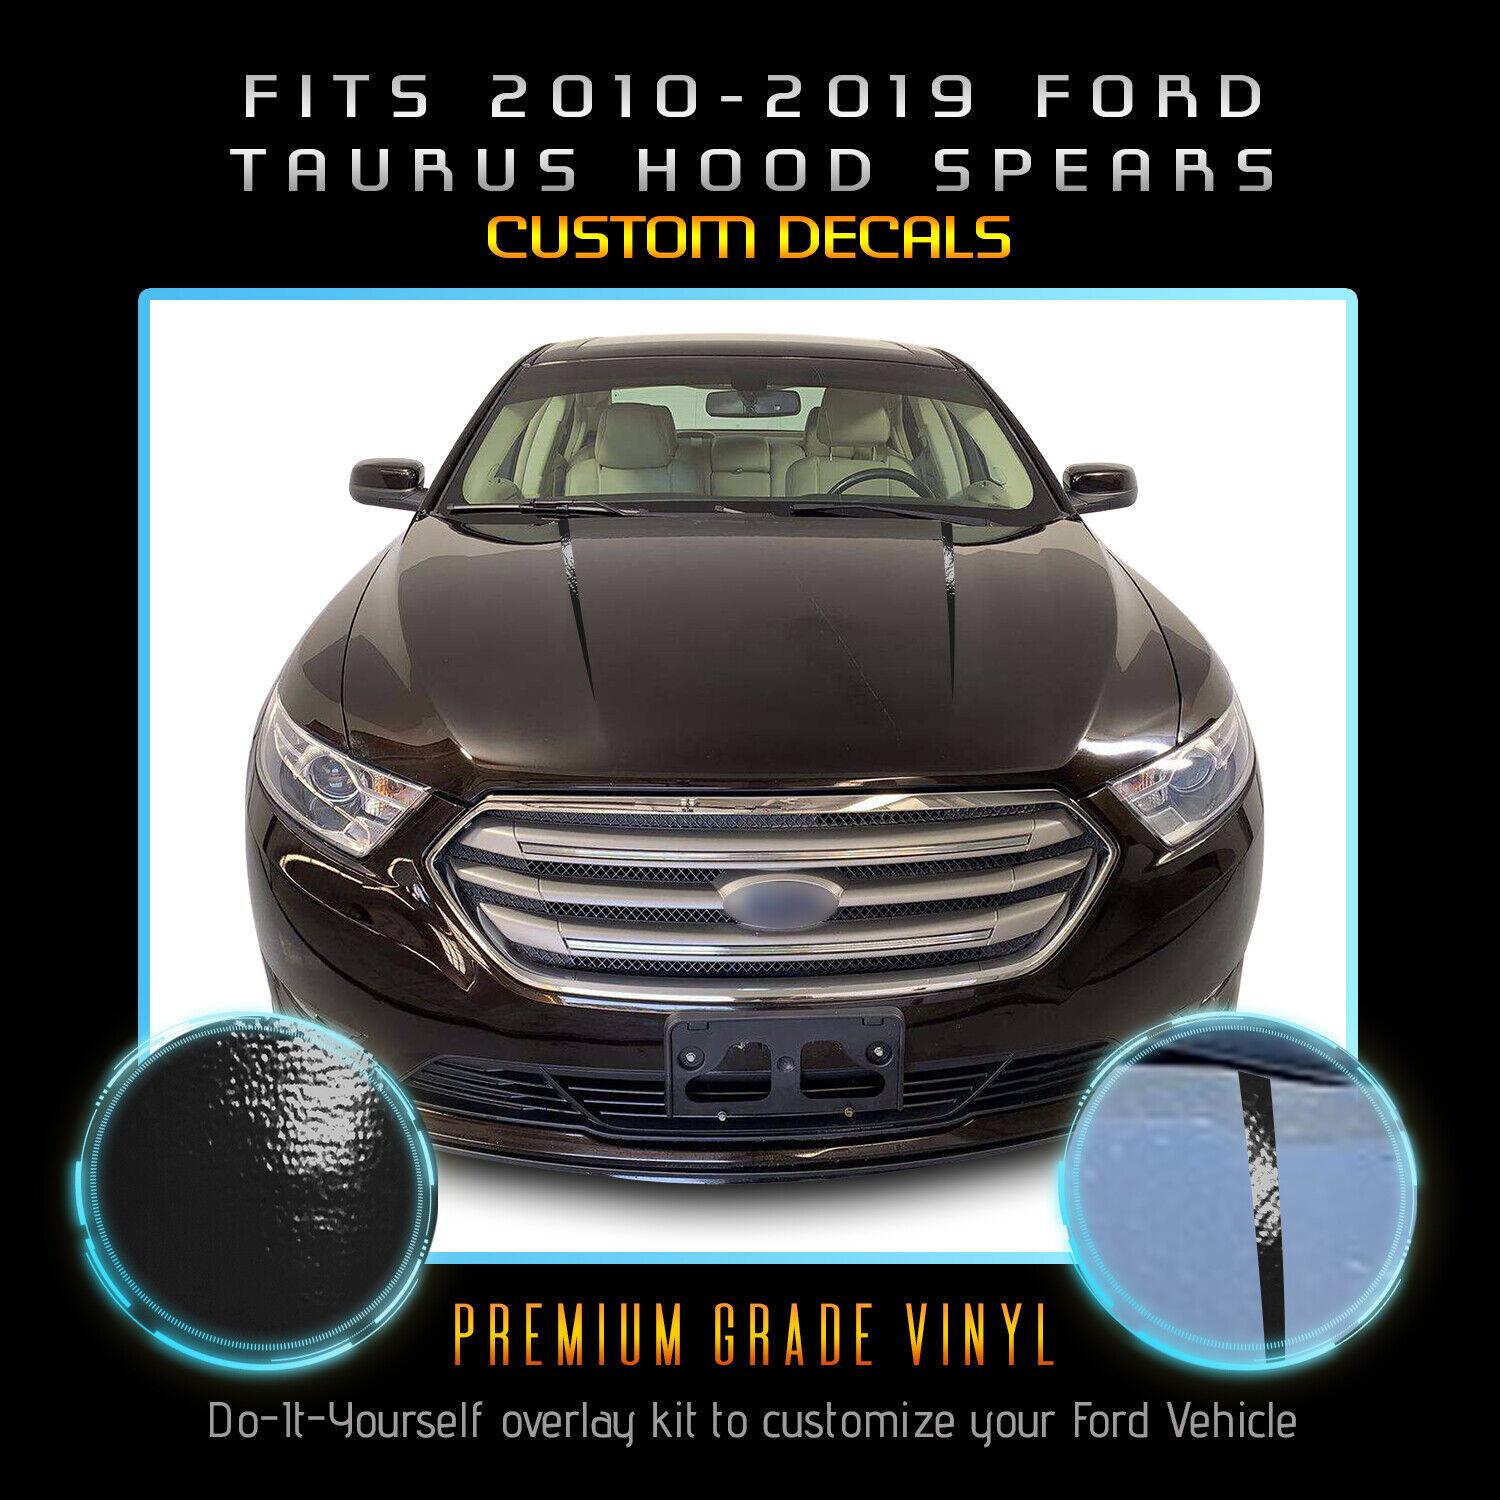 For 2010-2019 Ford Taurus Hood Spear Stripe Graphic Decals - Gloss Vinyl